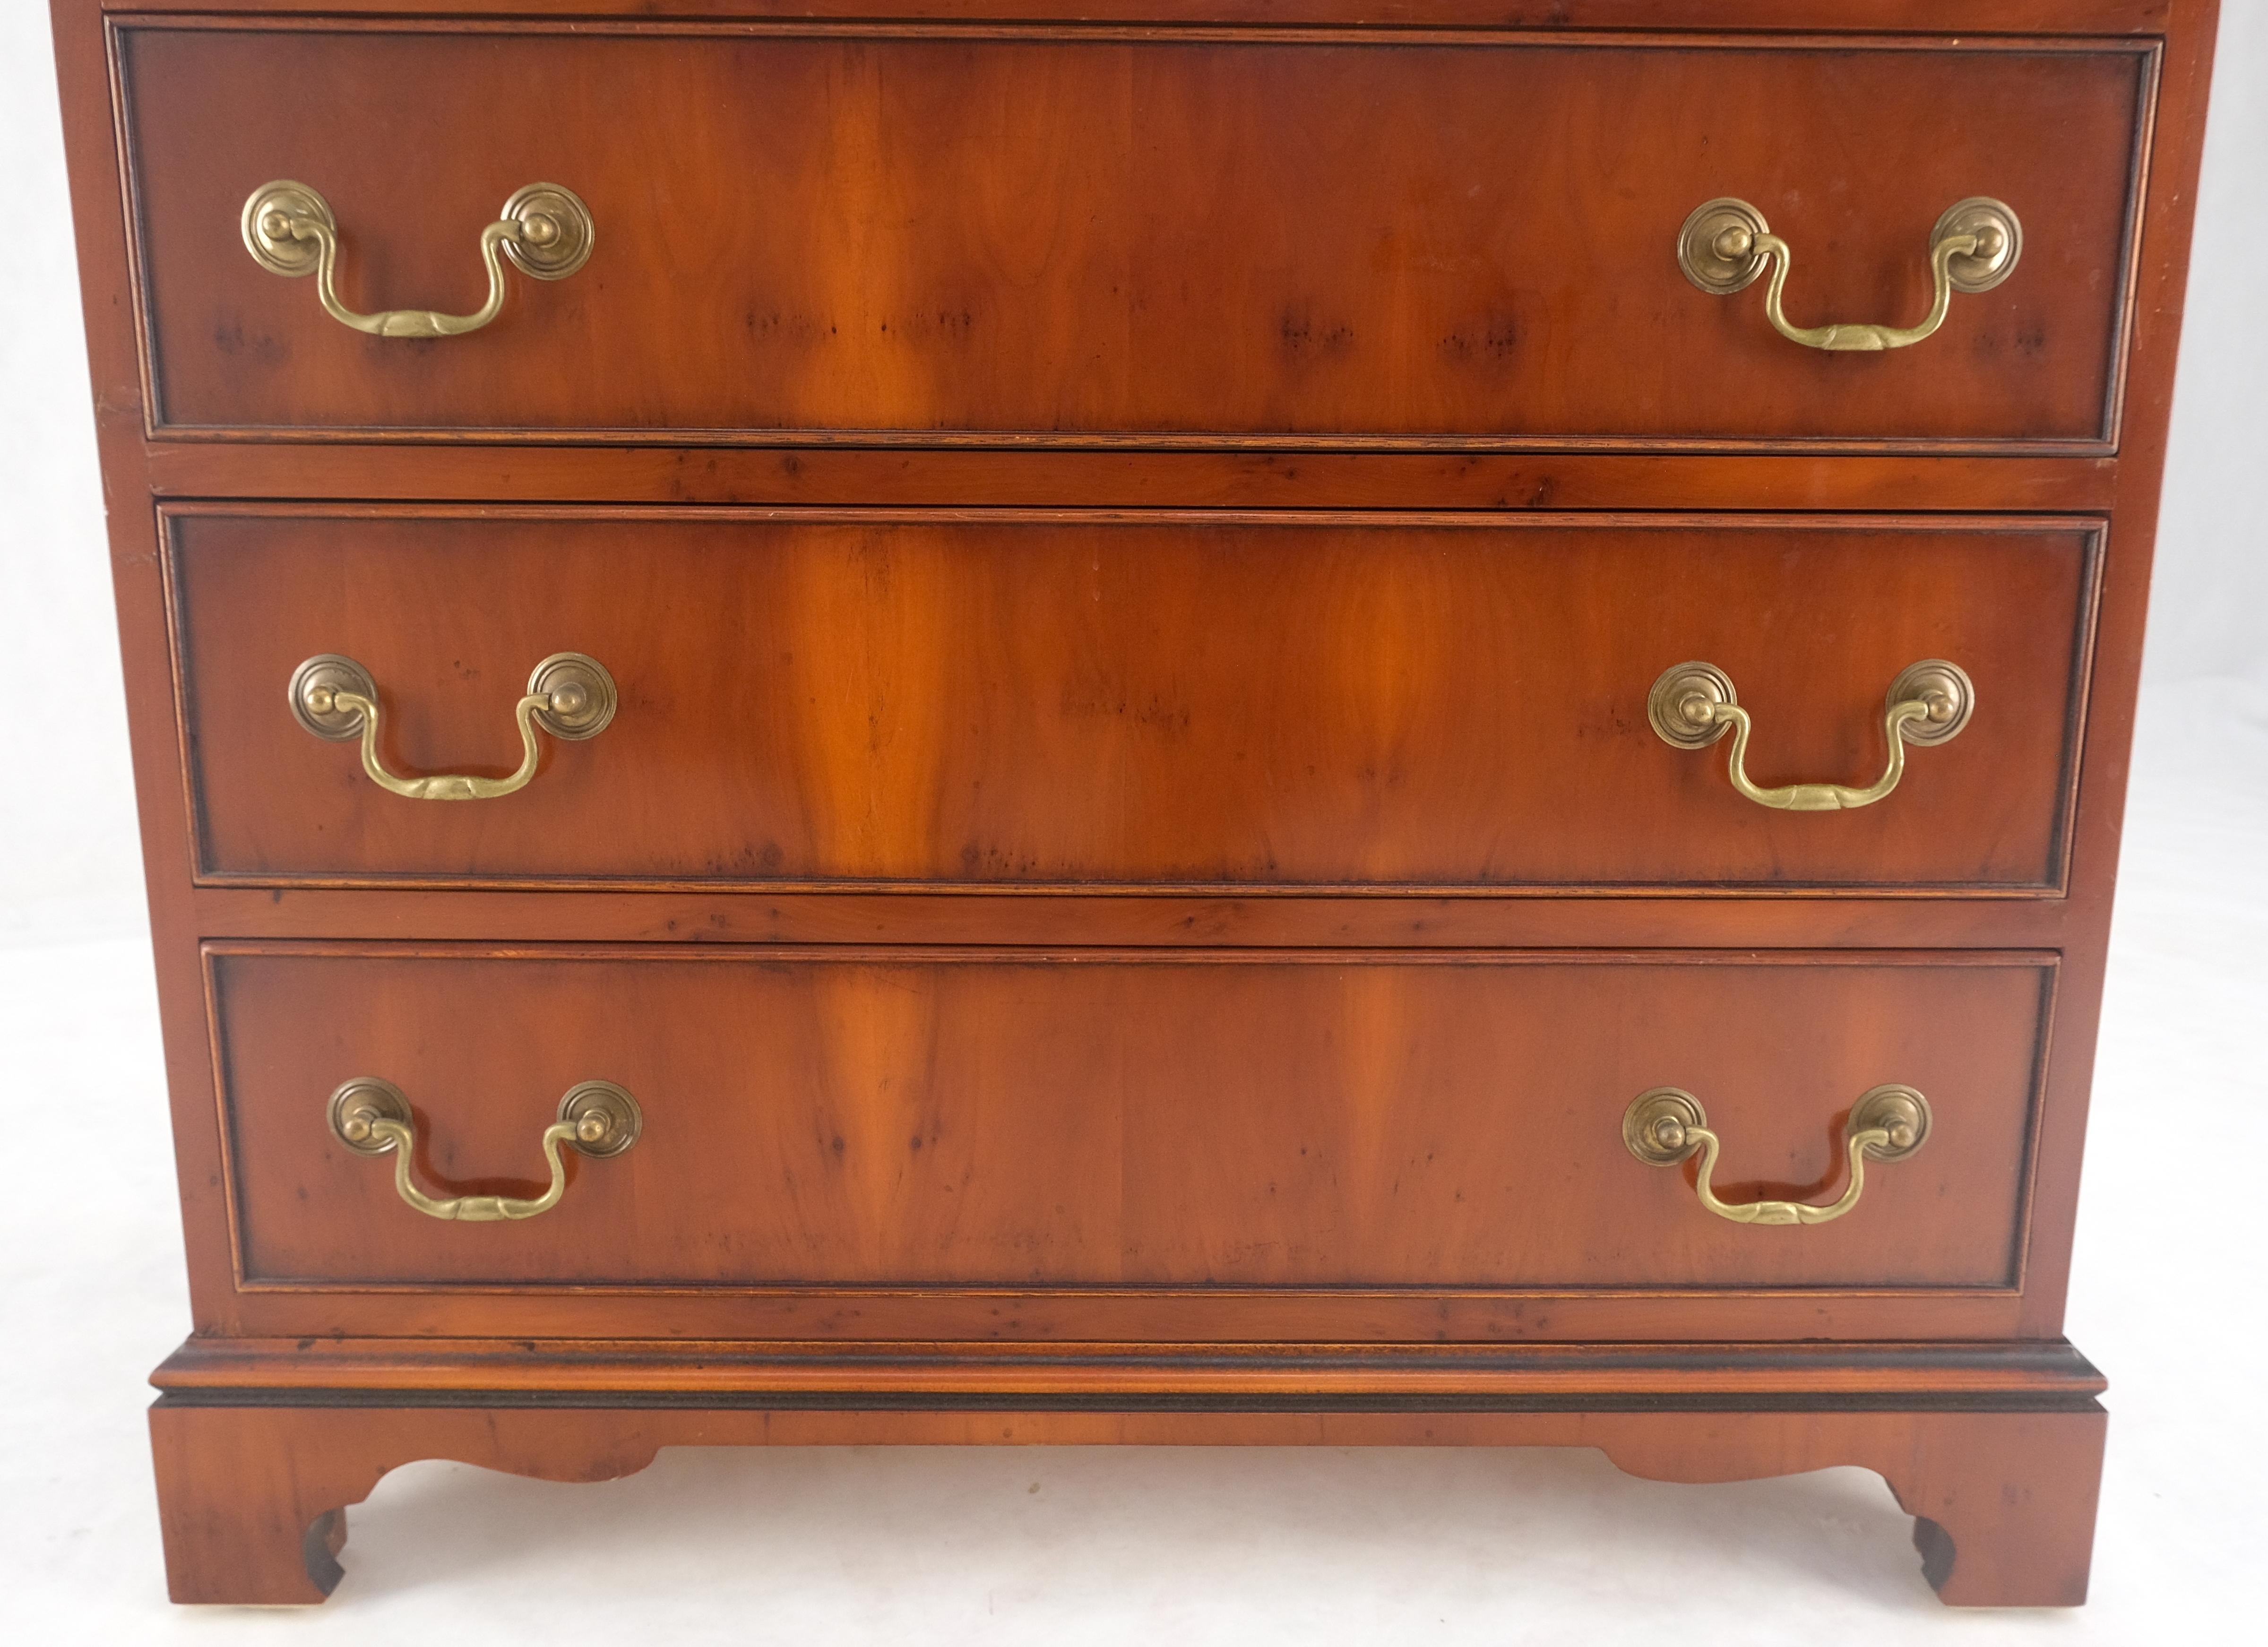 20th Century Yew Wood Leather Top Drop Front Secretary Desk 3 Drawers Brass Hardware MINT! For Sale